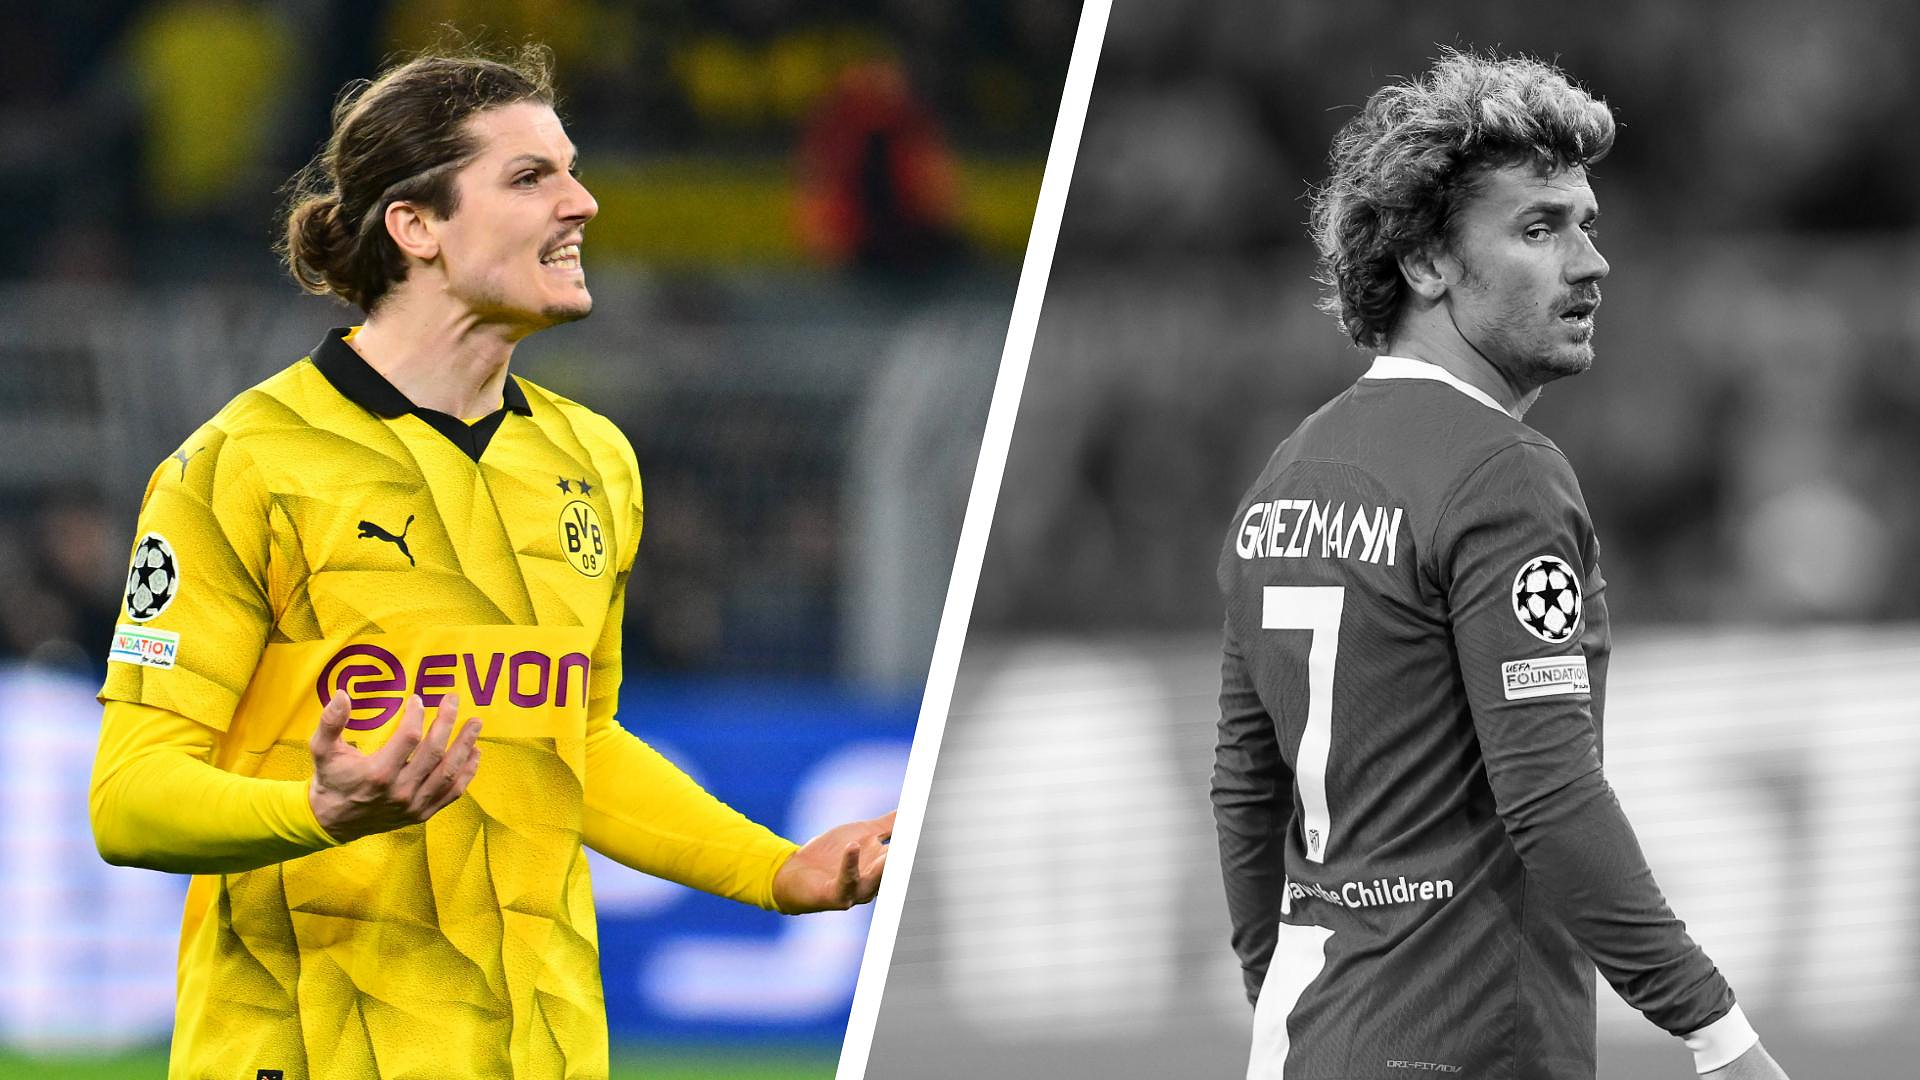 Dortmund-Atlético Madrid: Decisive Sabitzer, the “Yellow Wall” awaits PSG, Griezmann too timid... The tops and the flops